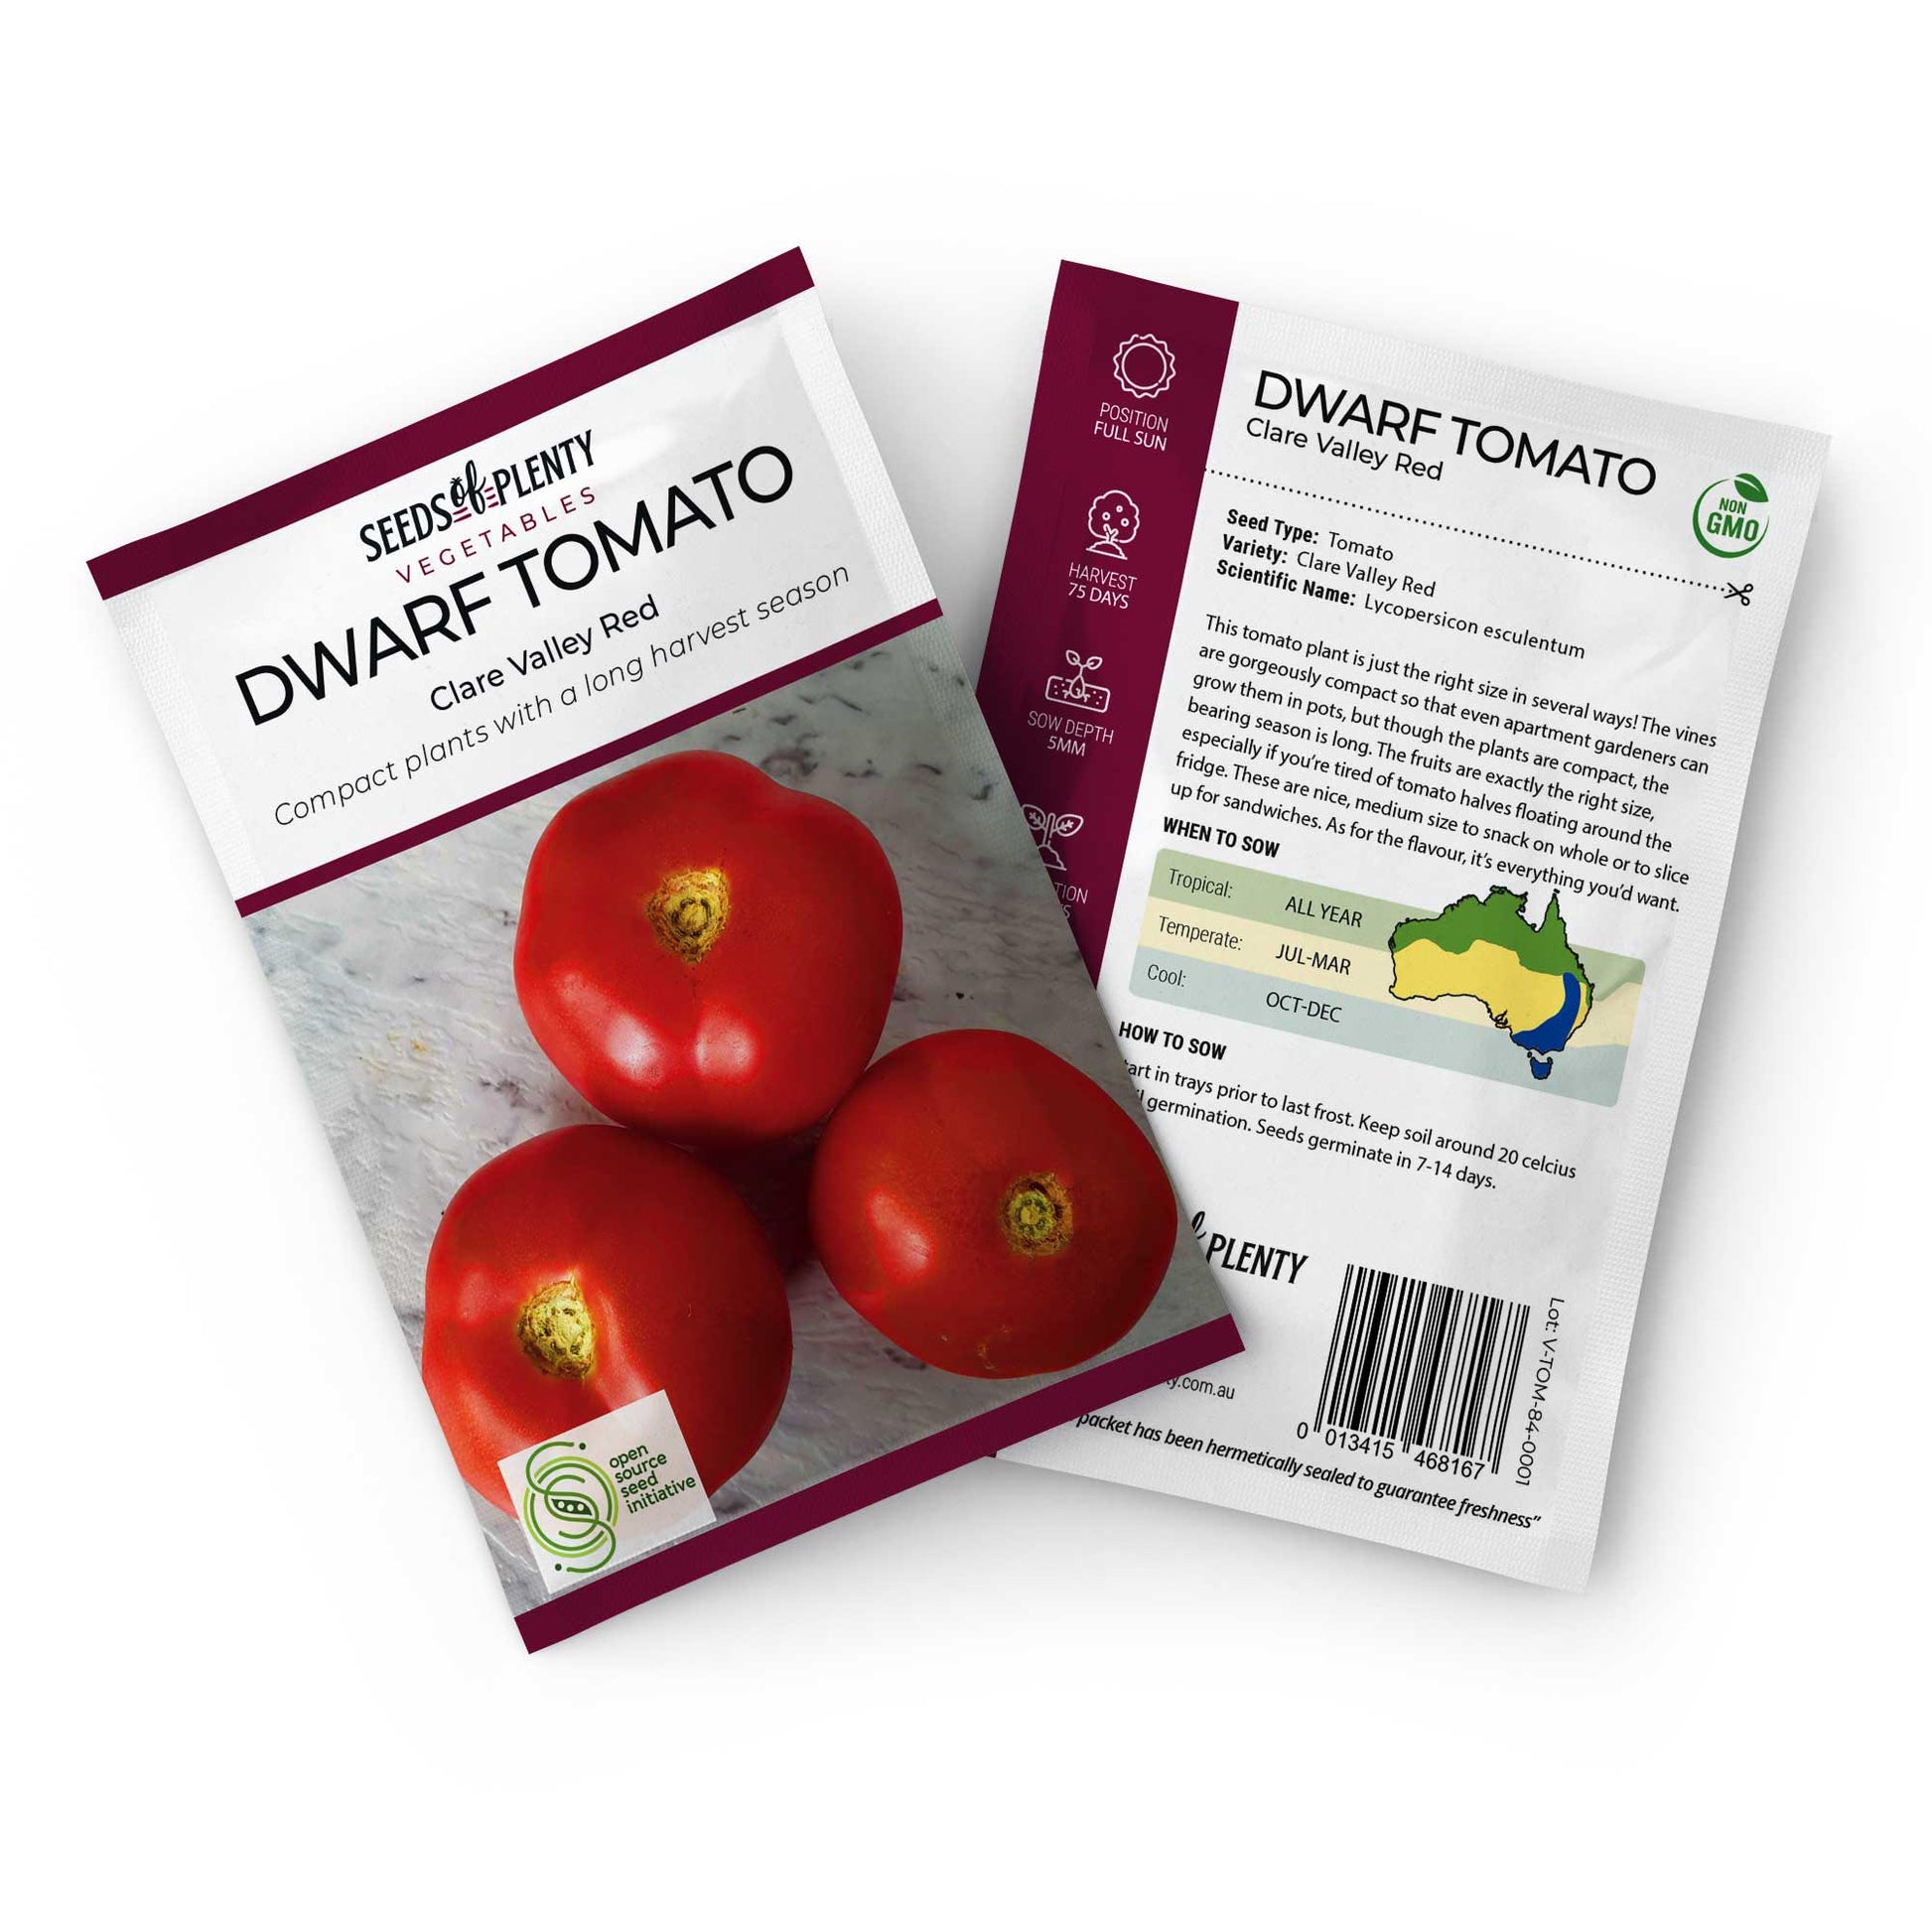 DWARF TOMATO - Clare Valley Red Default Title